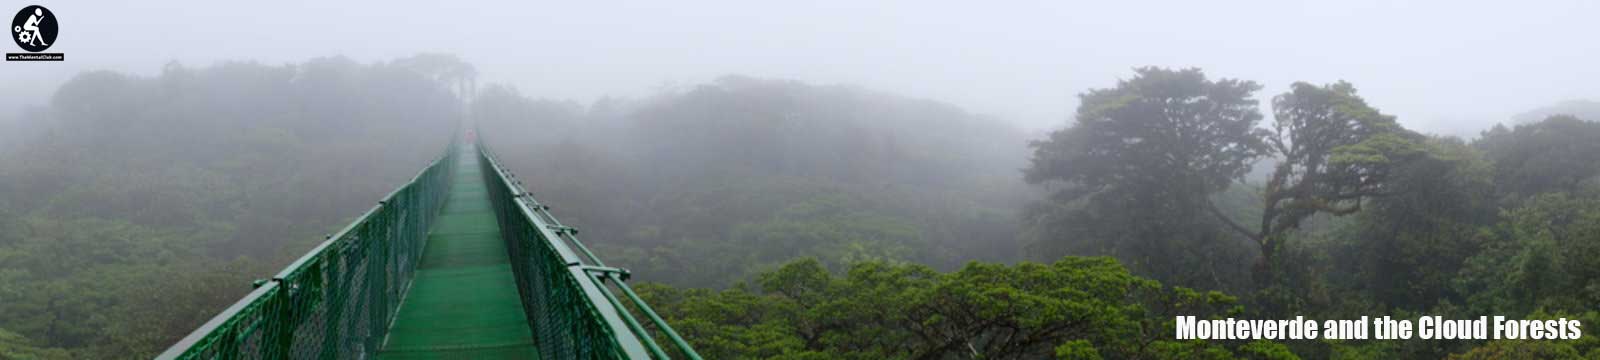 Monteverde and the Cloud Forests